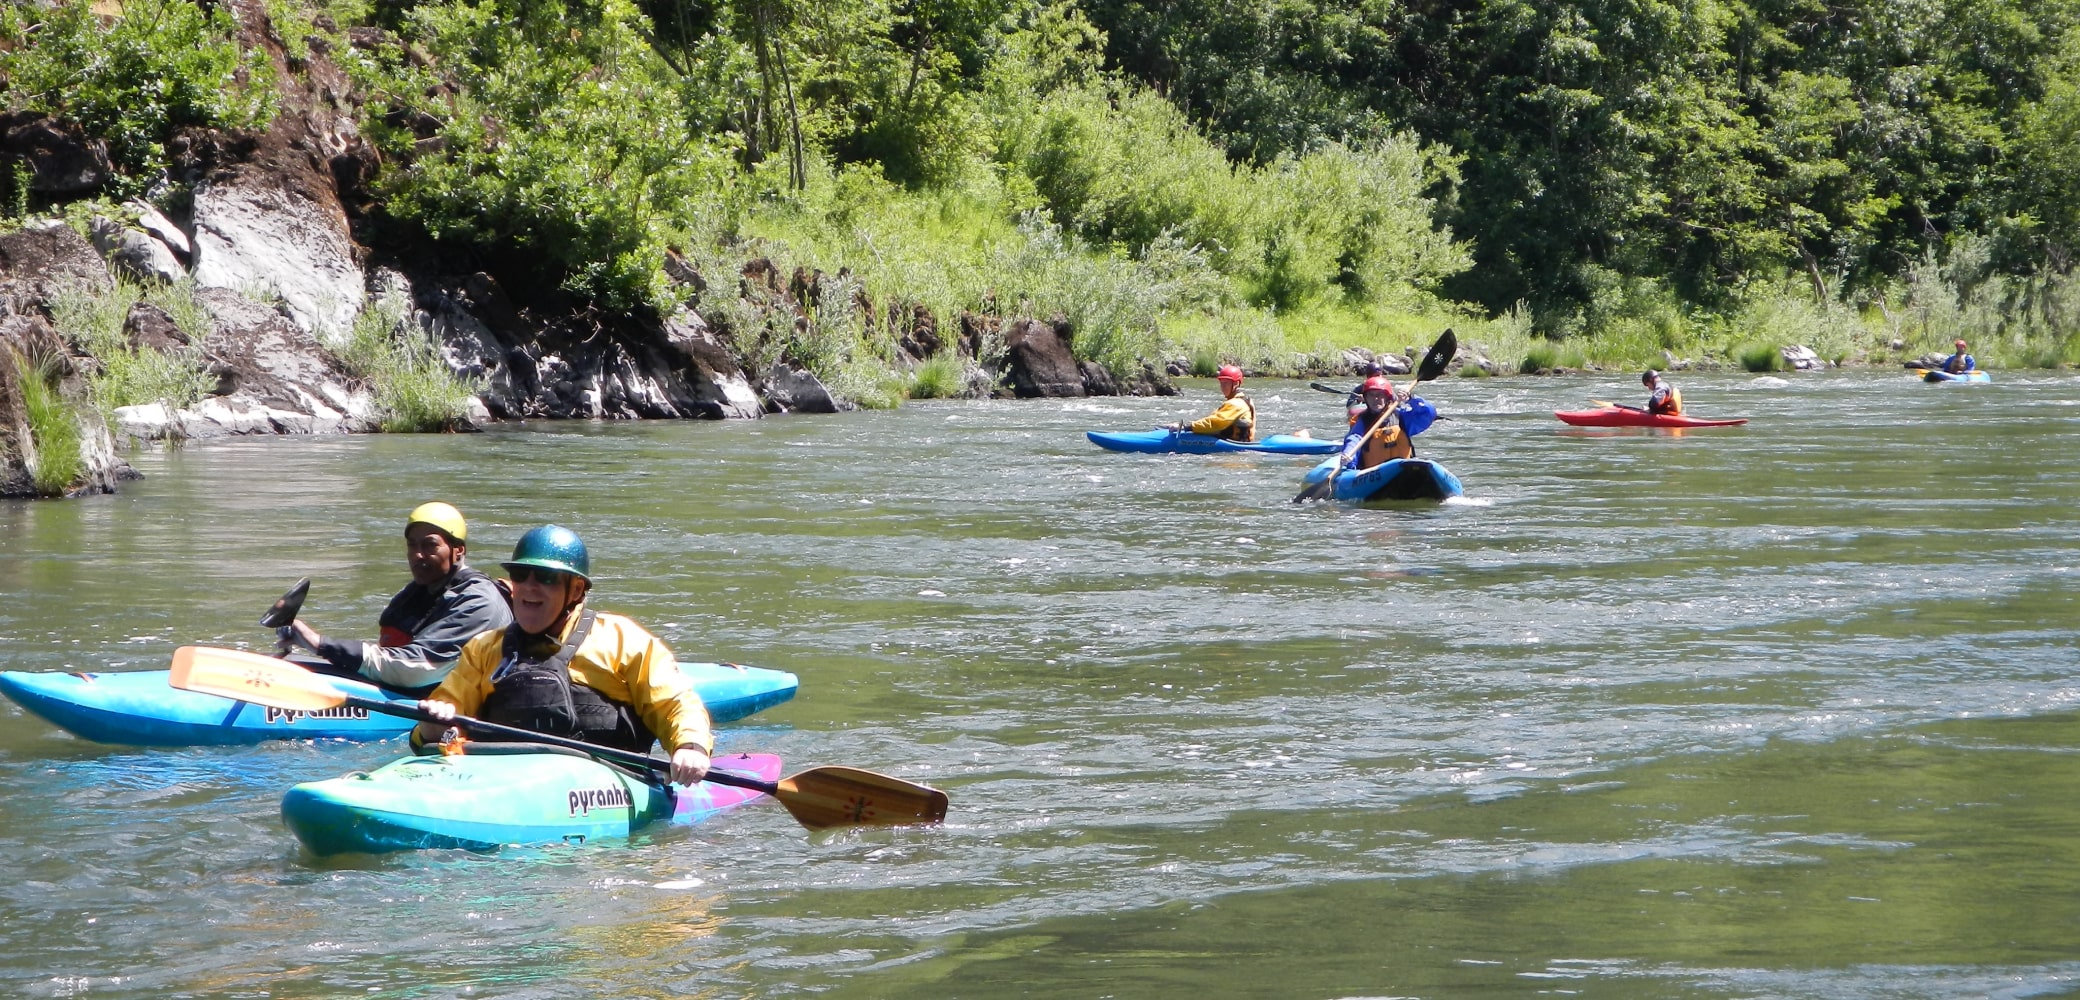 Seven different kayakers navigating the Rogue River in Oregon.